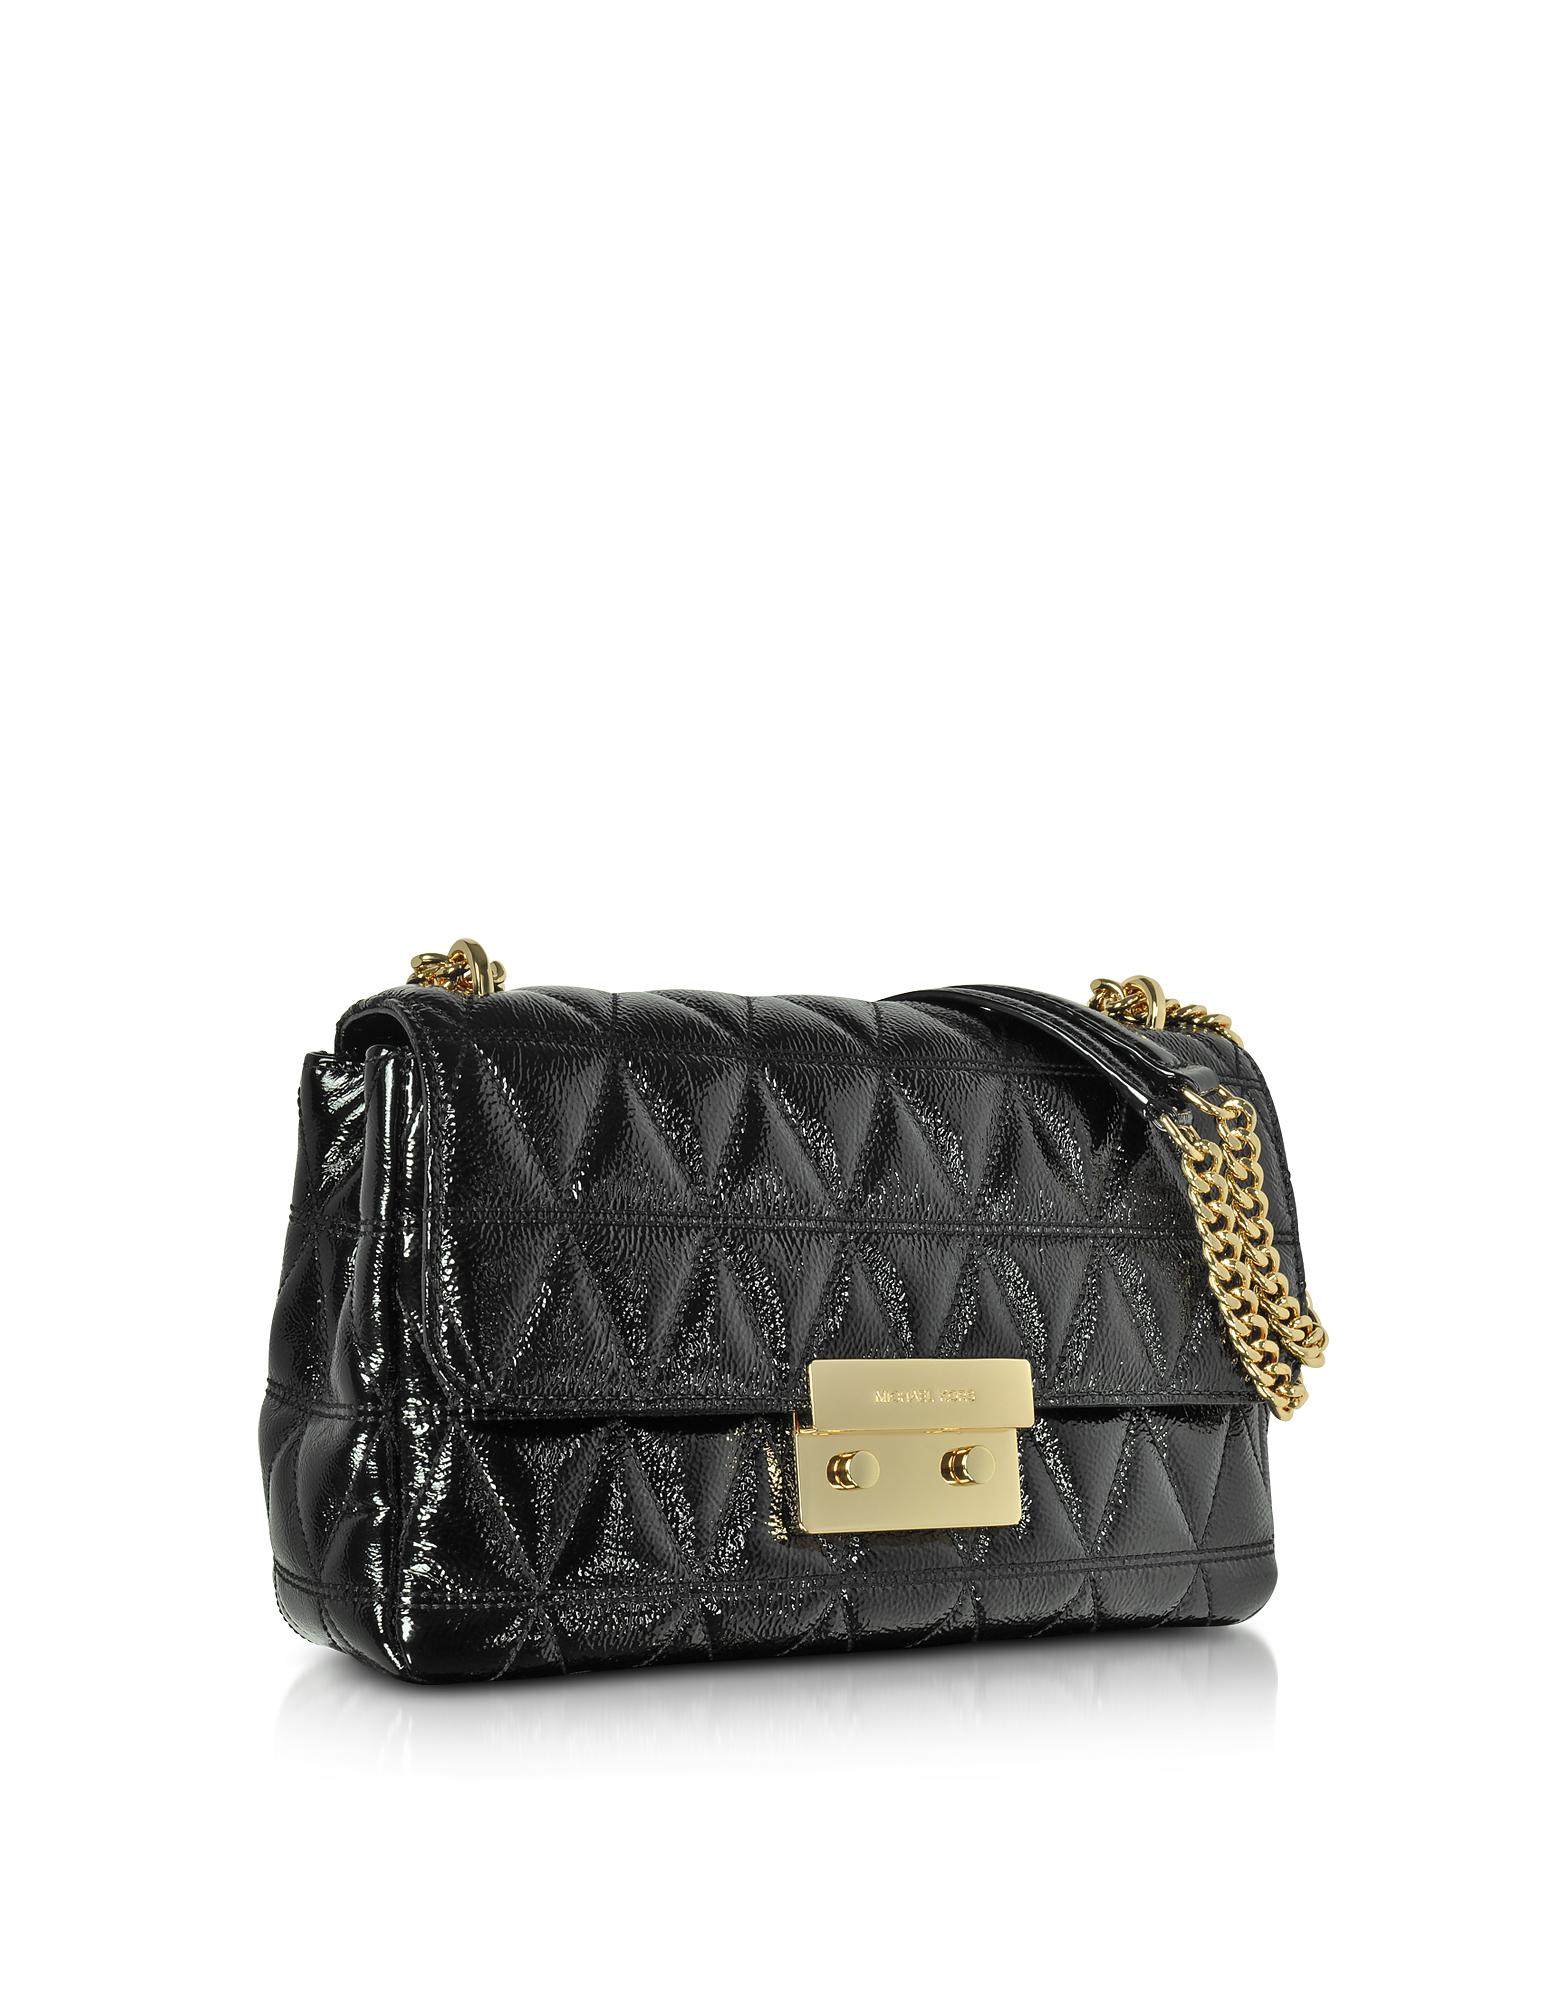 Michael Kors Sloan Large Black Quilted Patent Leather Chain Shoulder Bag - Lyst